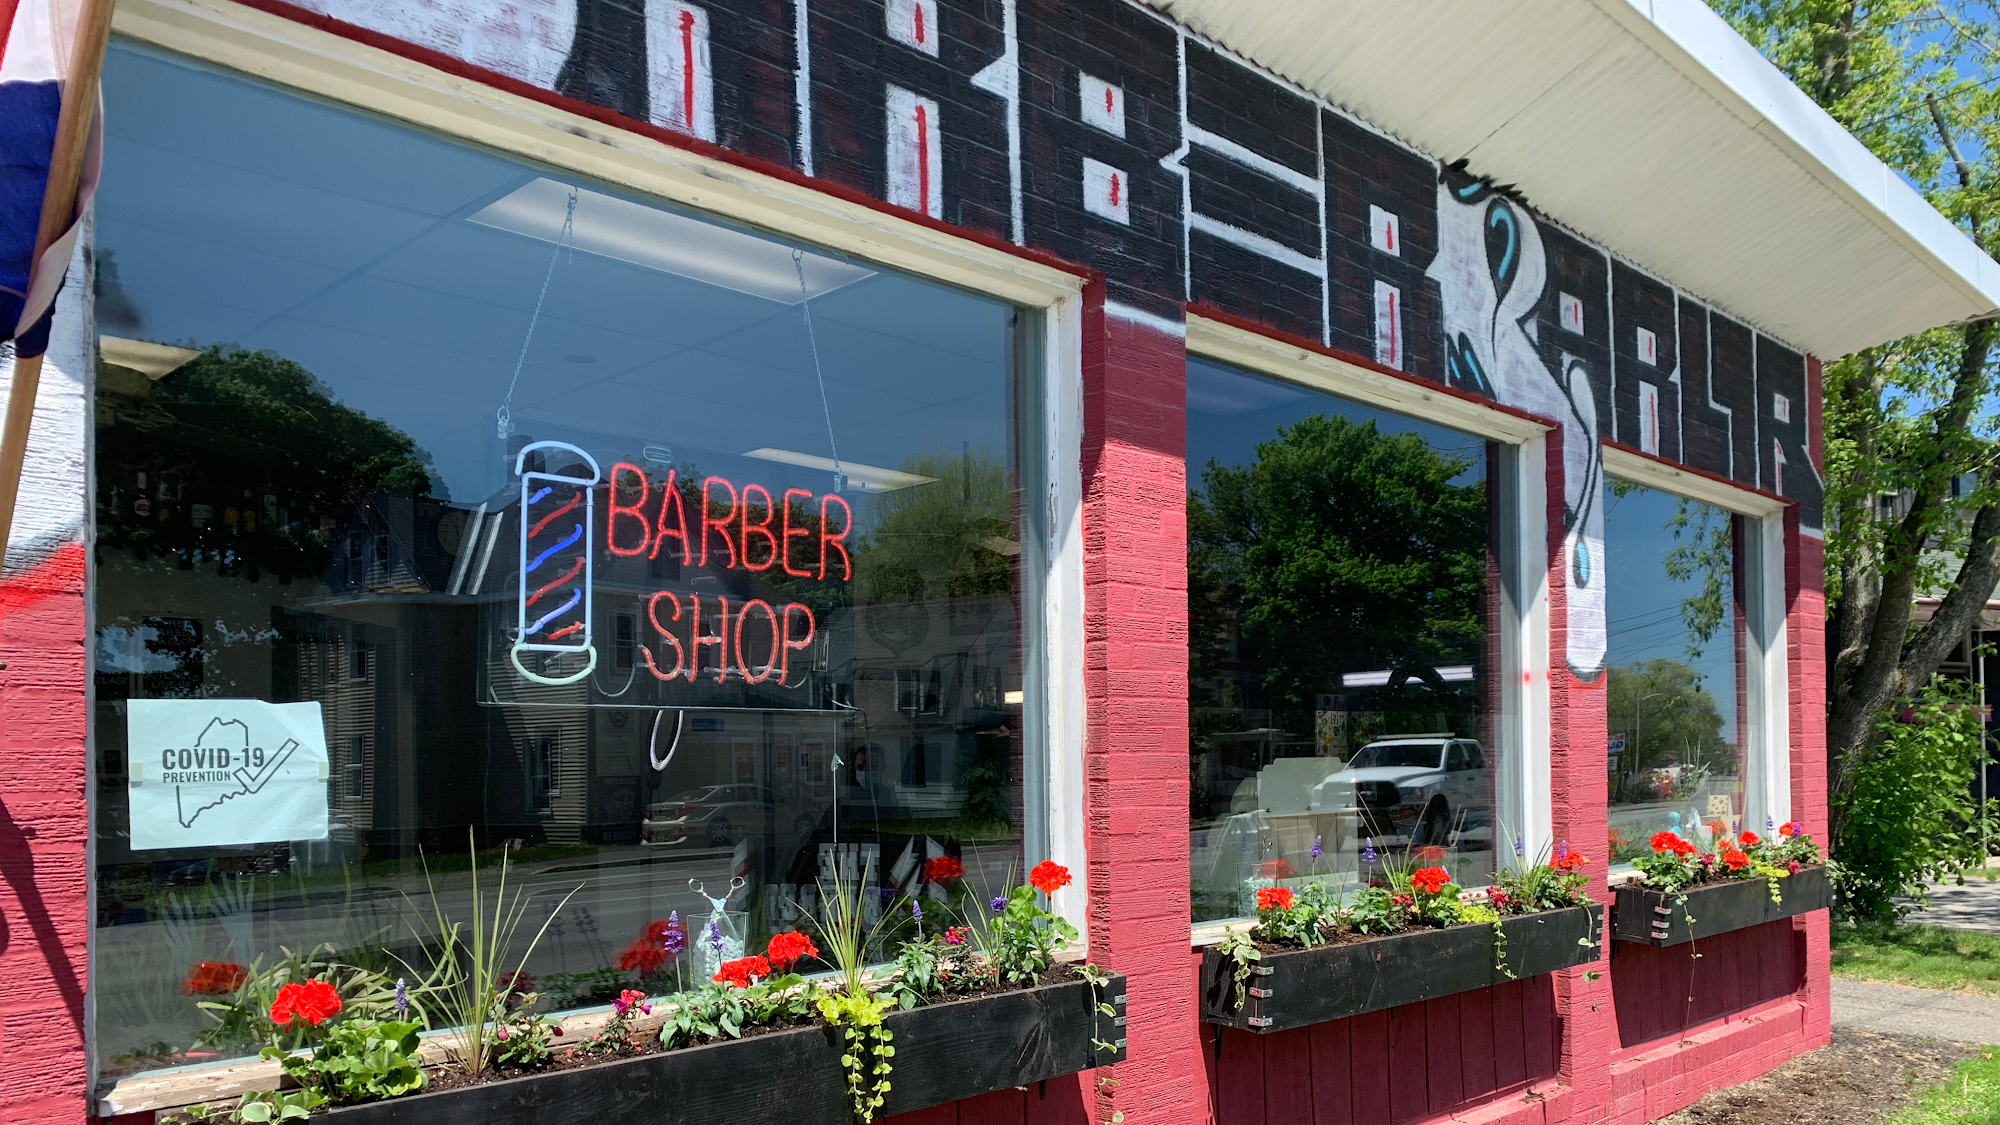 The Barber Parlor